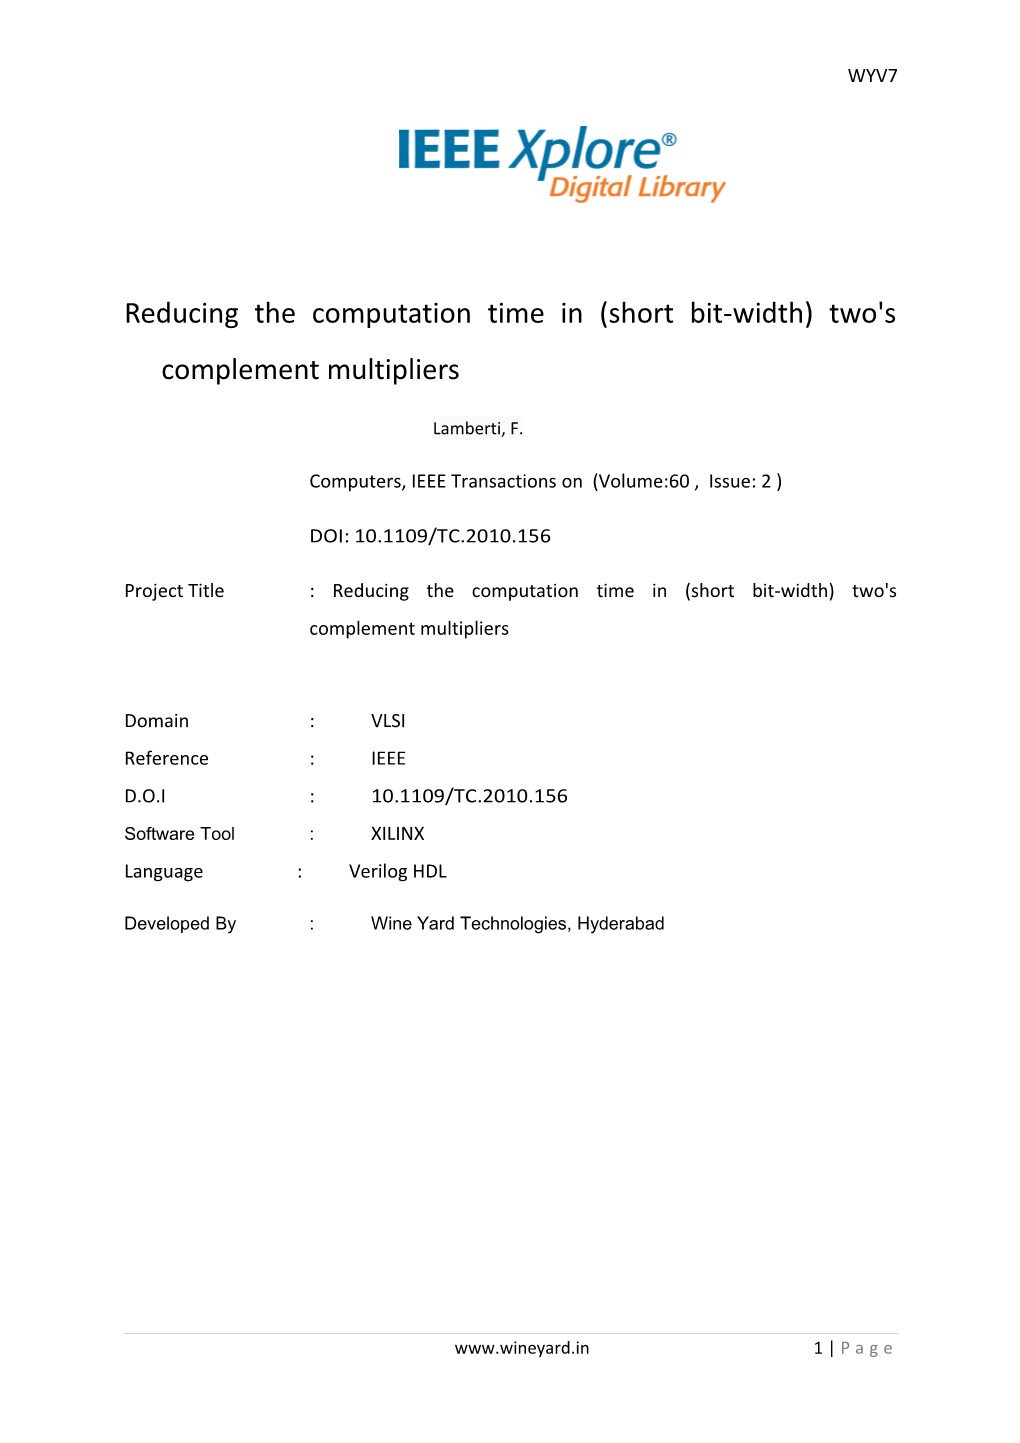 Reducing the Computation Time in (Short Bit-Width) Two's Complement Multipliers